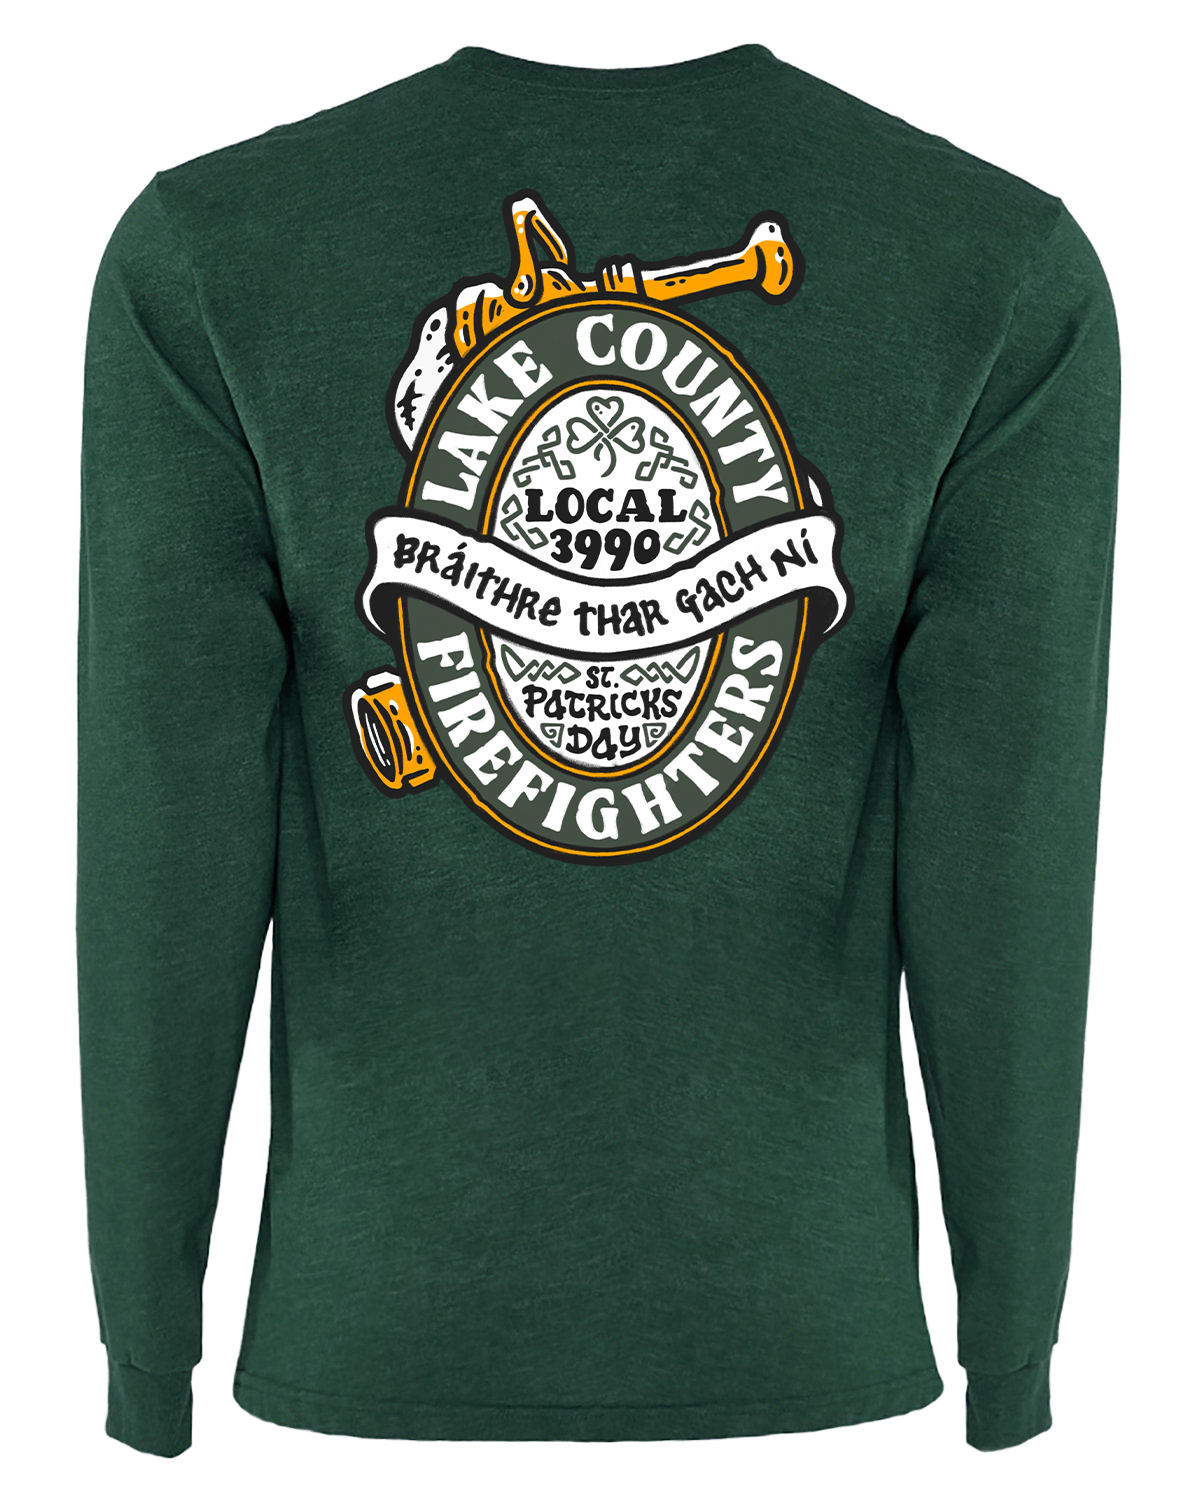 Lake County Firefighters St. Paddy&